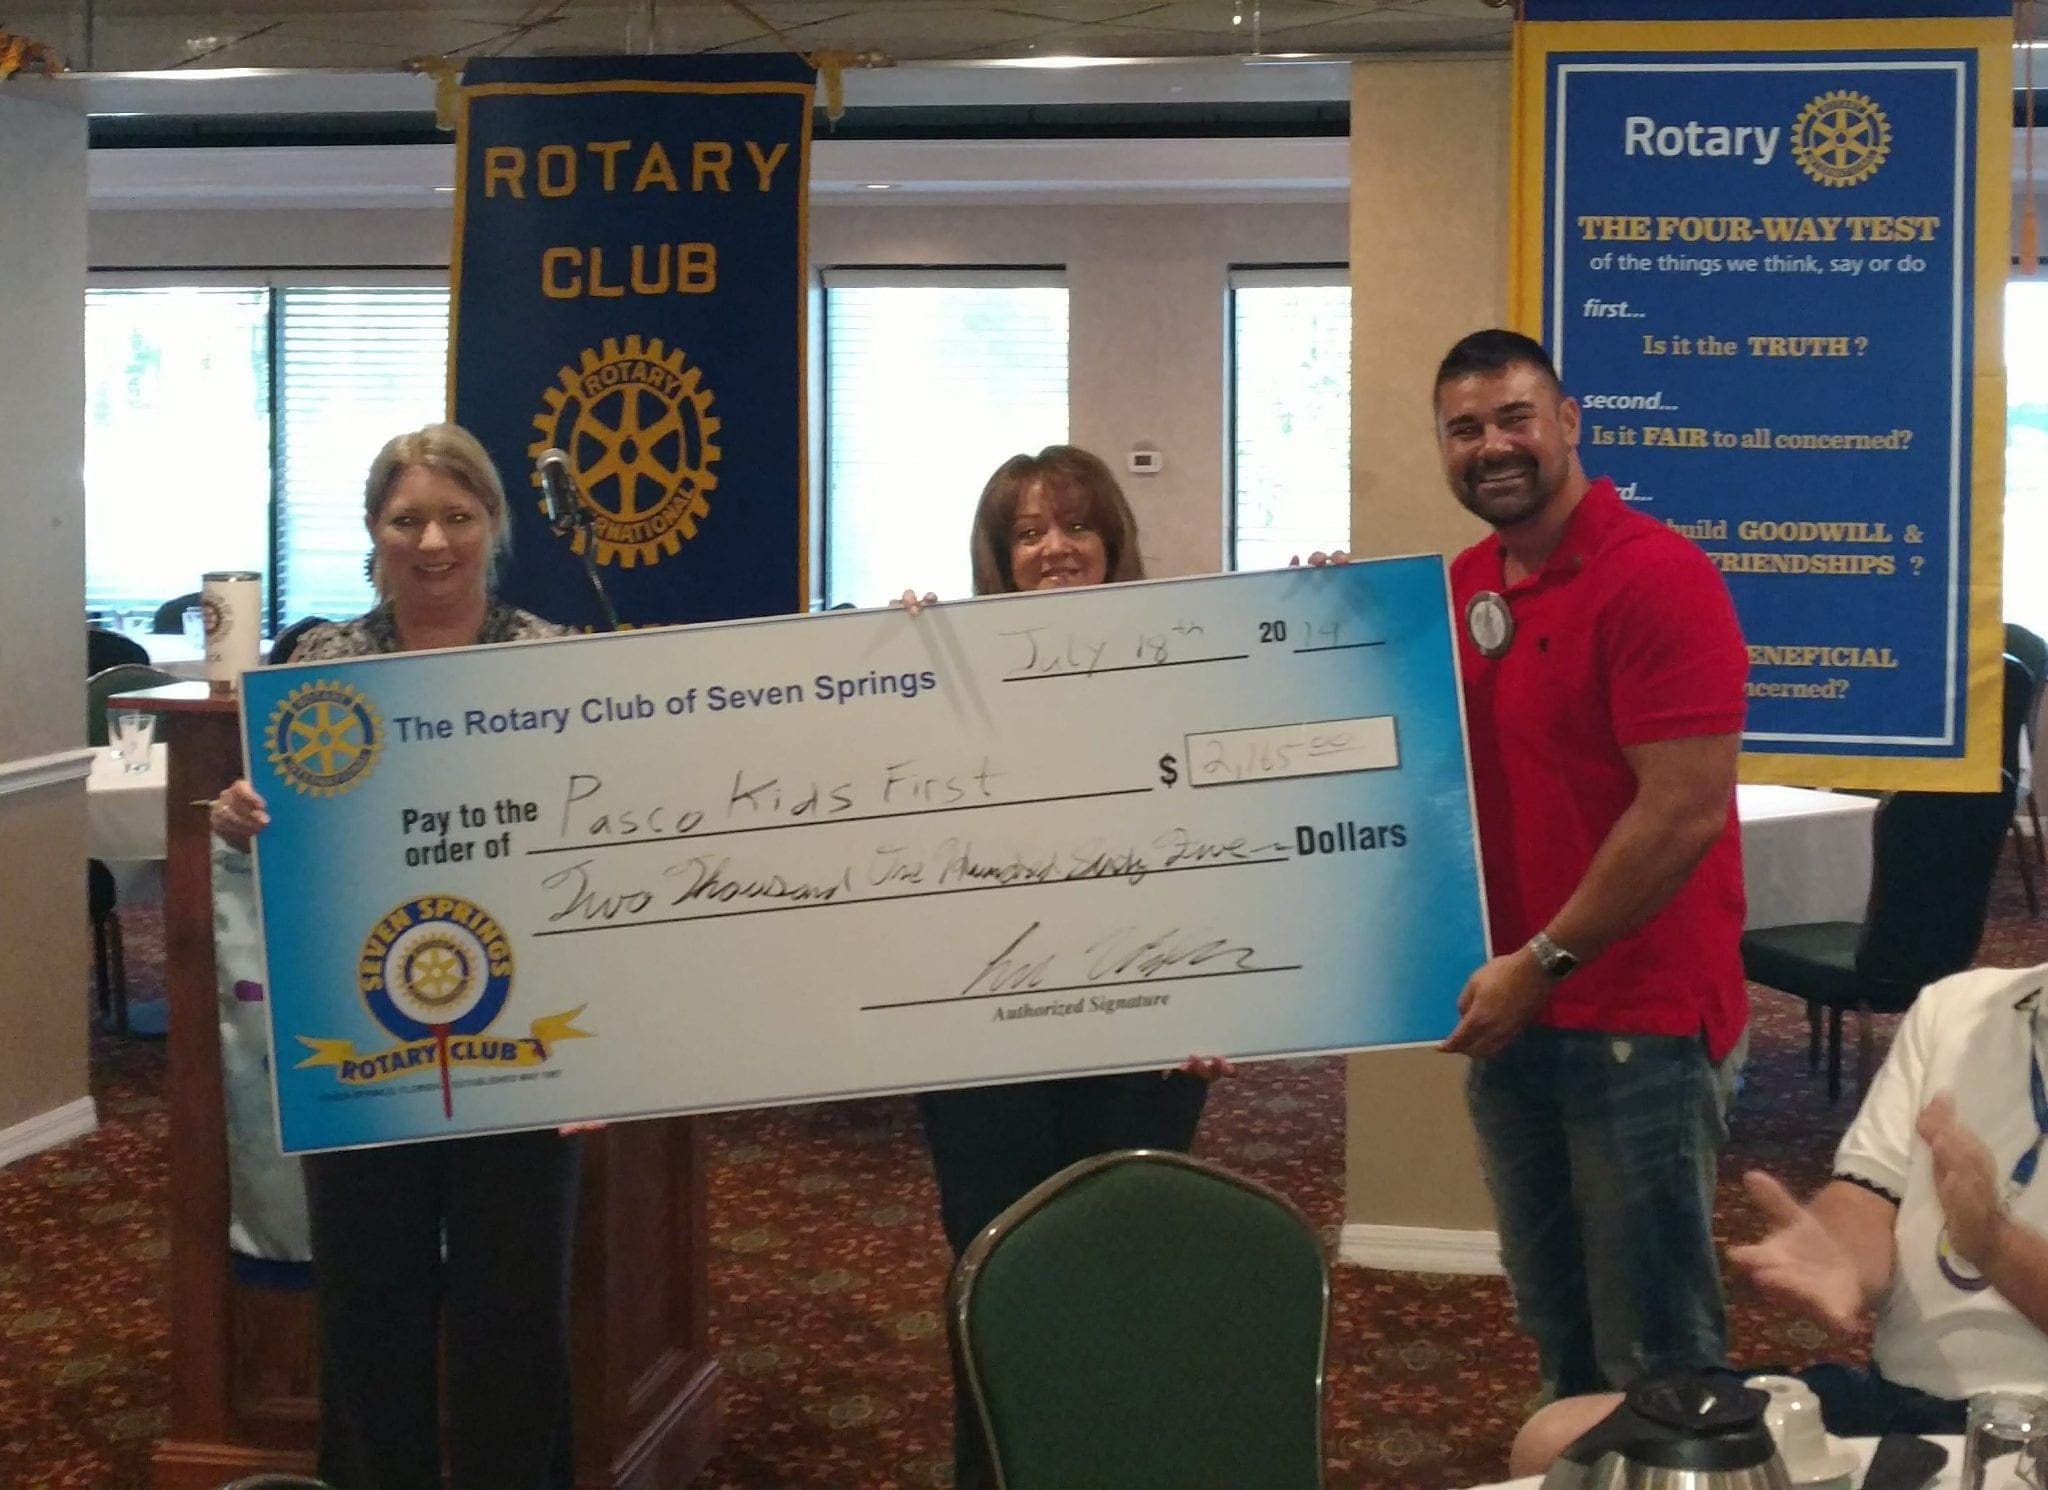 The Rotary Club of Seven Springs Rotary